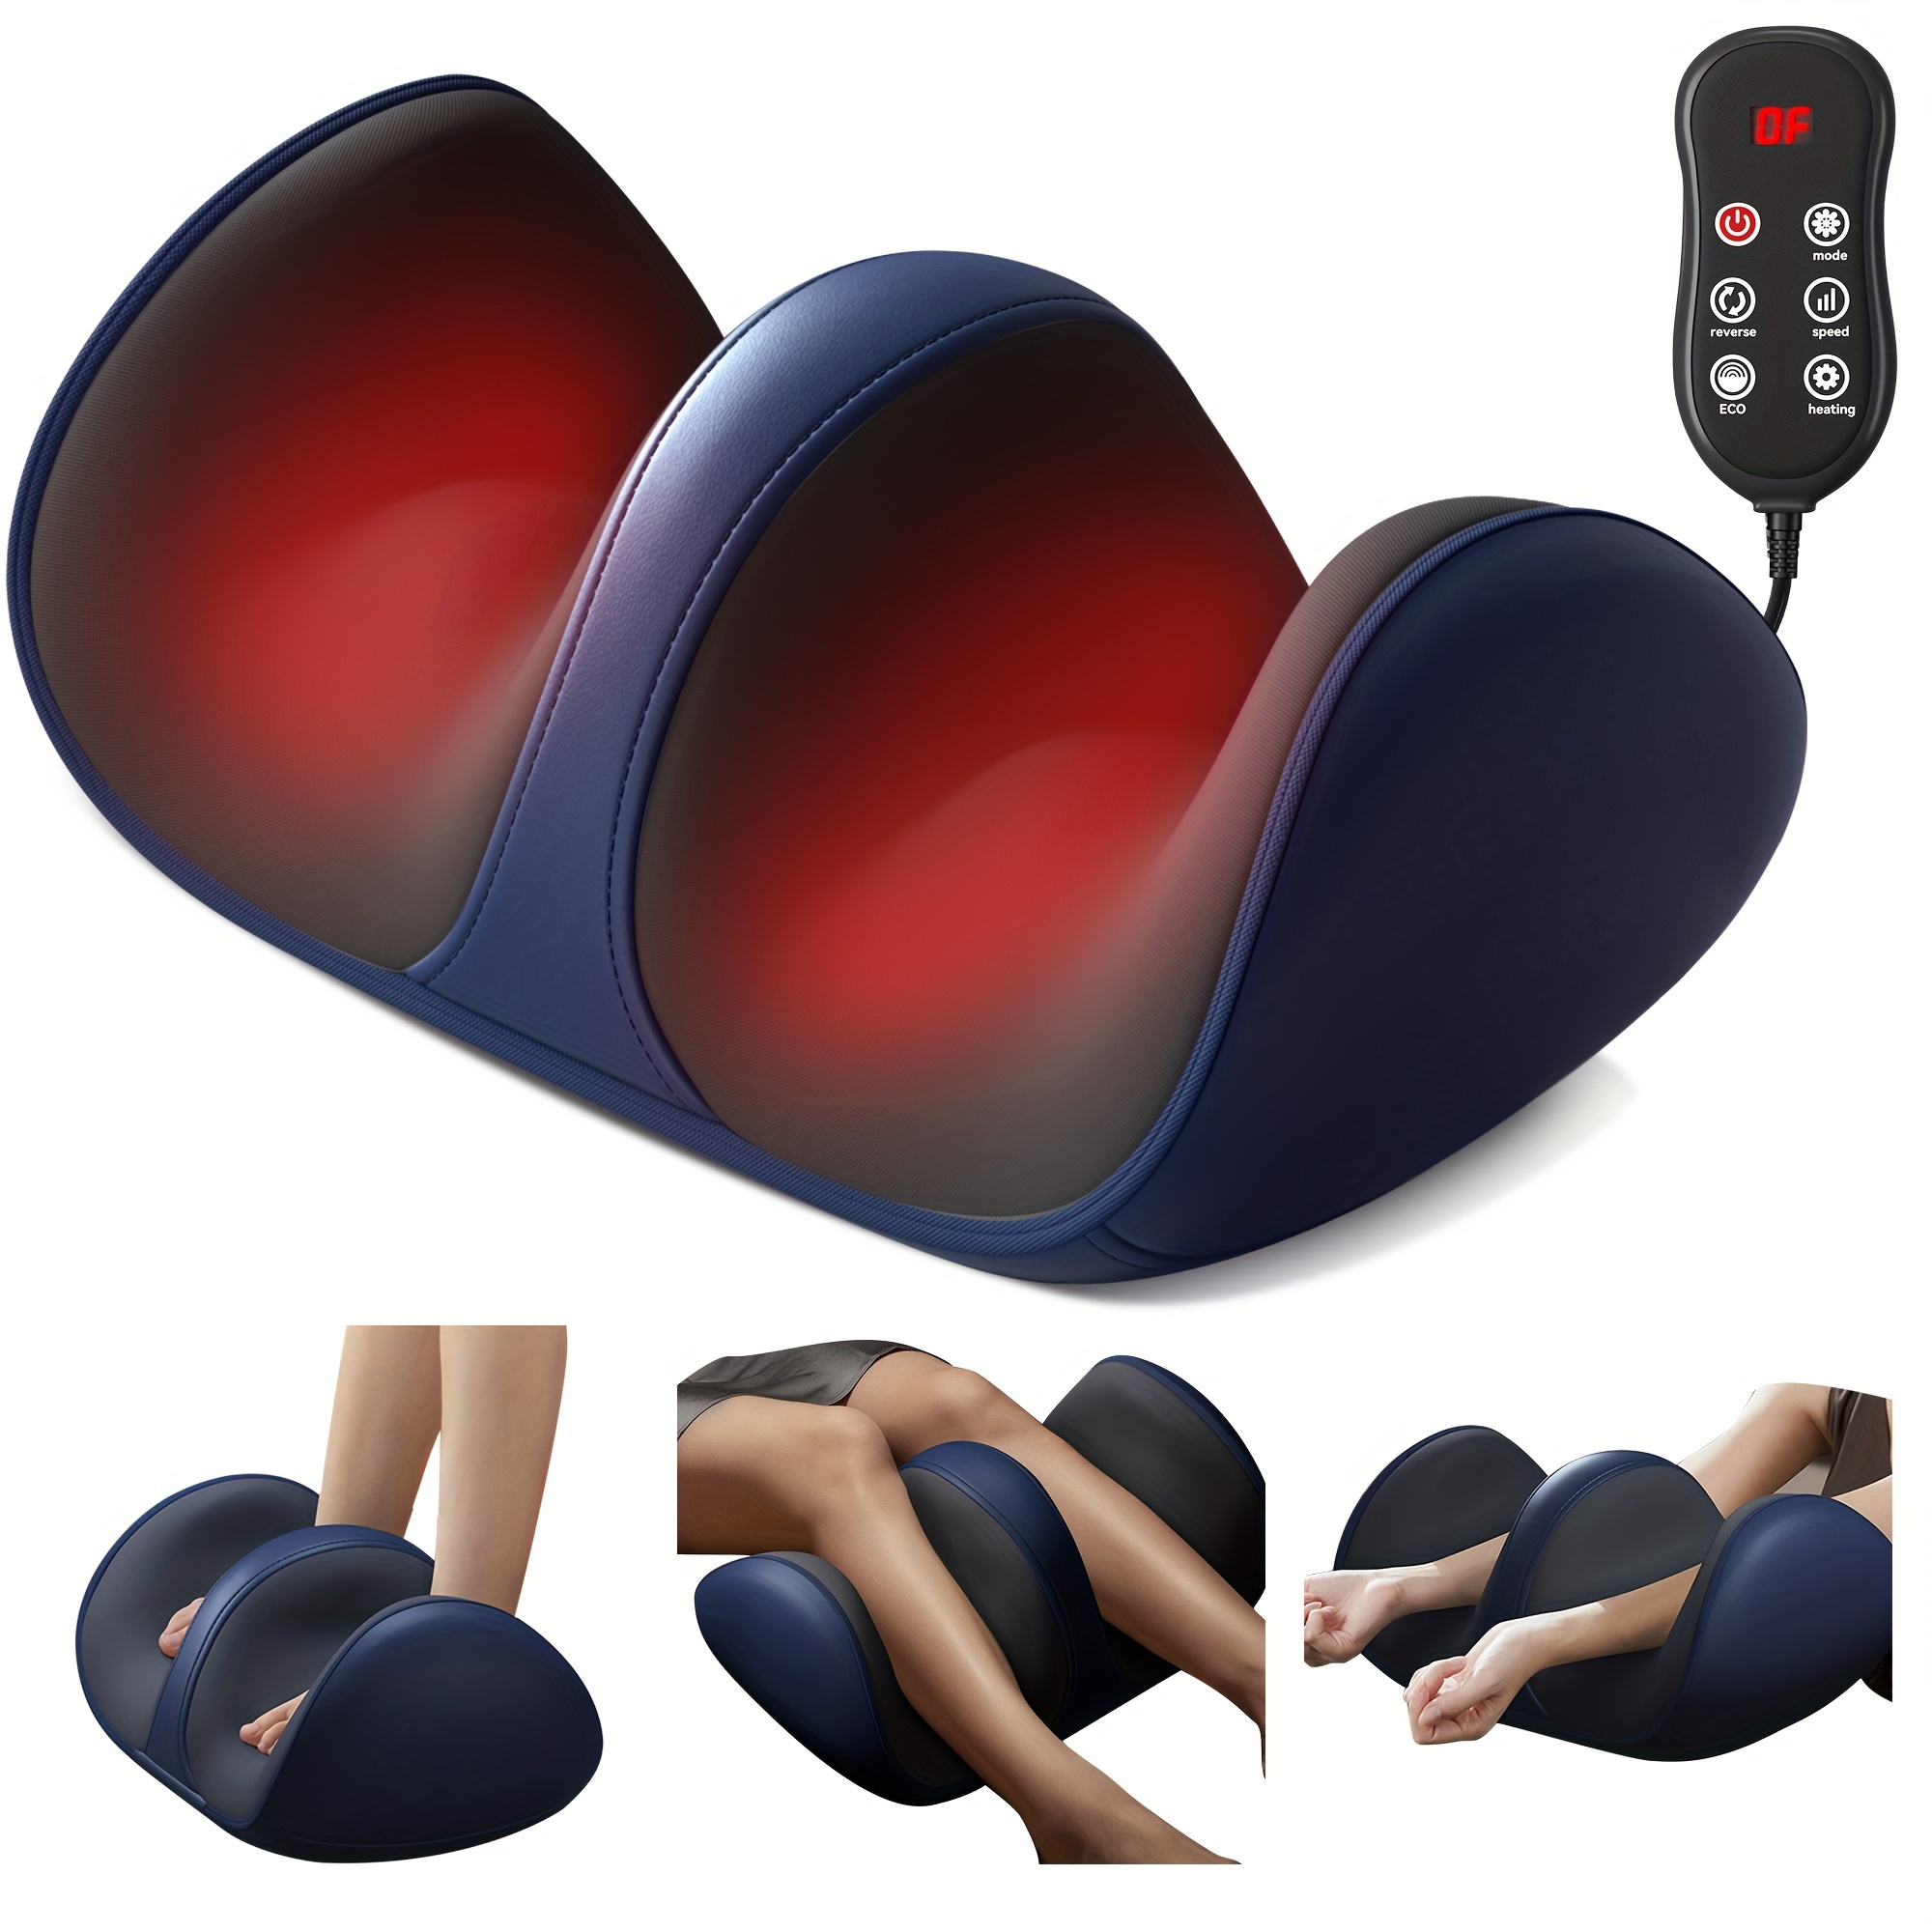 

3d Shiatsu Foot Massager For Circulation And Relax, Cordless Type-c Rechargeable Foot Massager Machine With Deep-kneading And Heat, Calf Massager, Ideal Gifts For Women Men Family